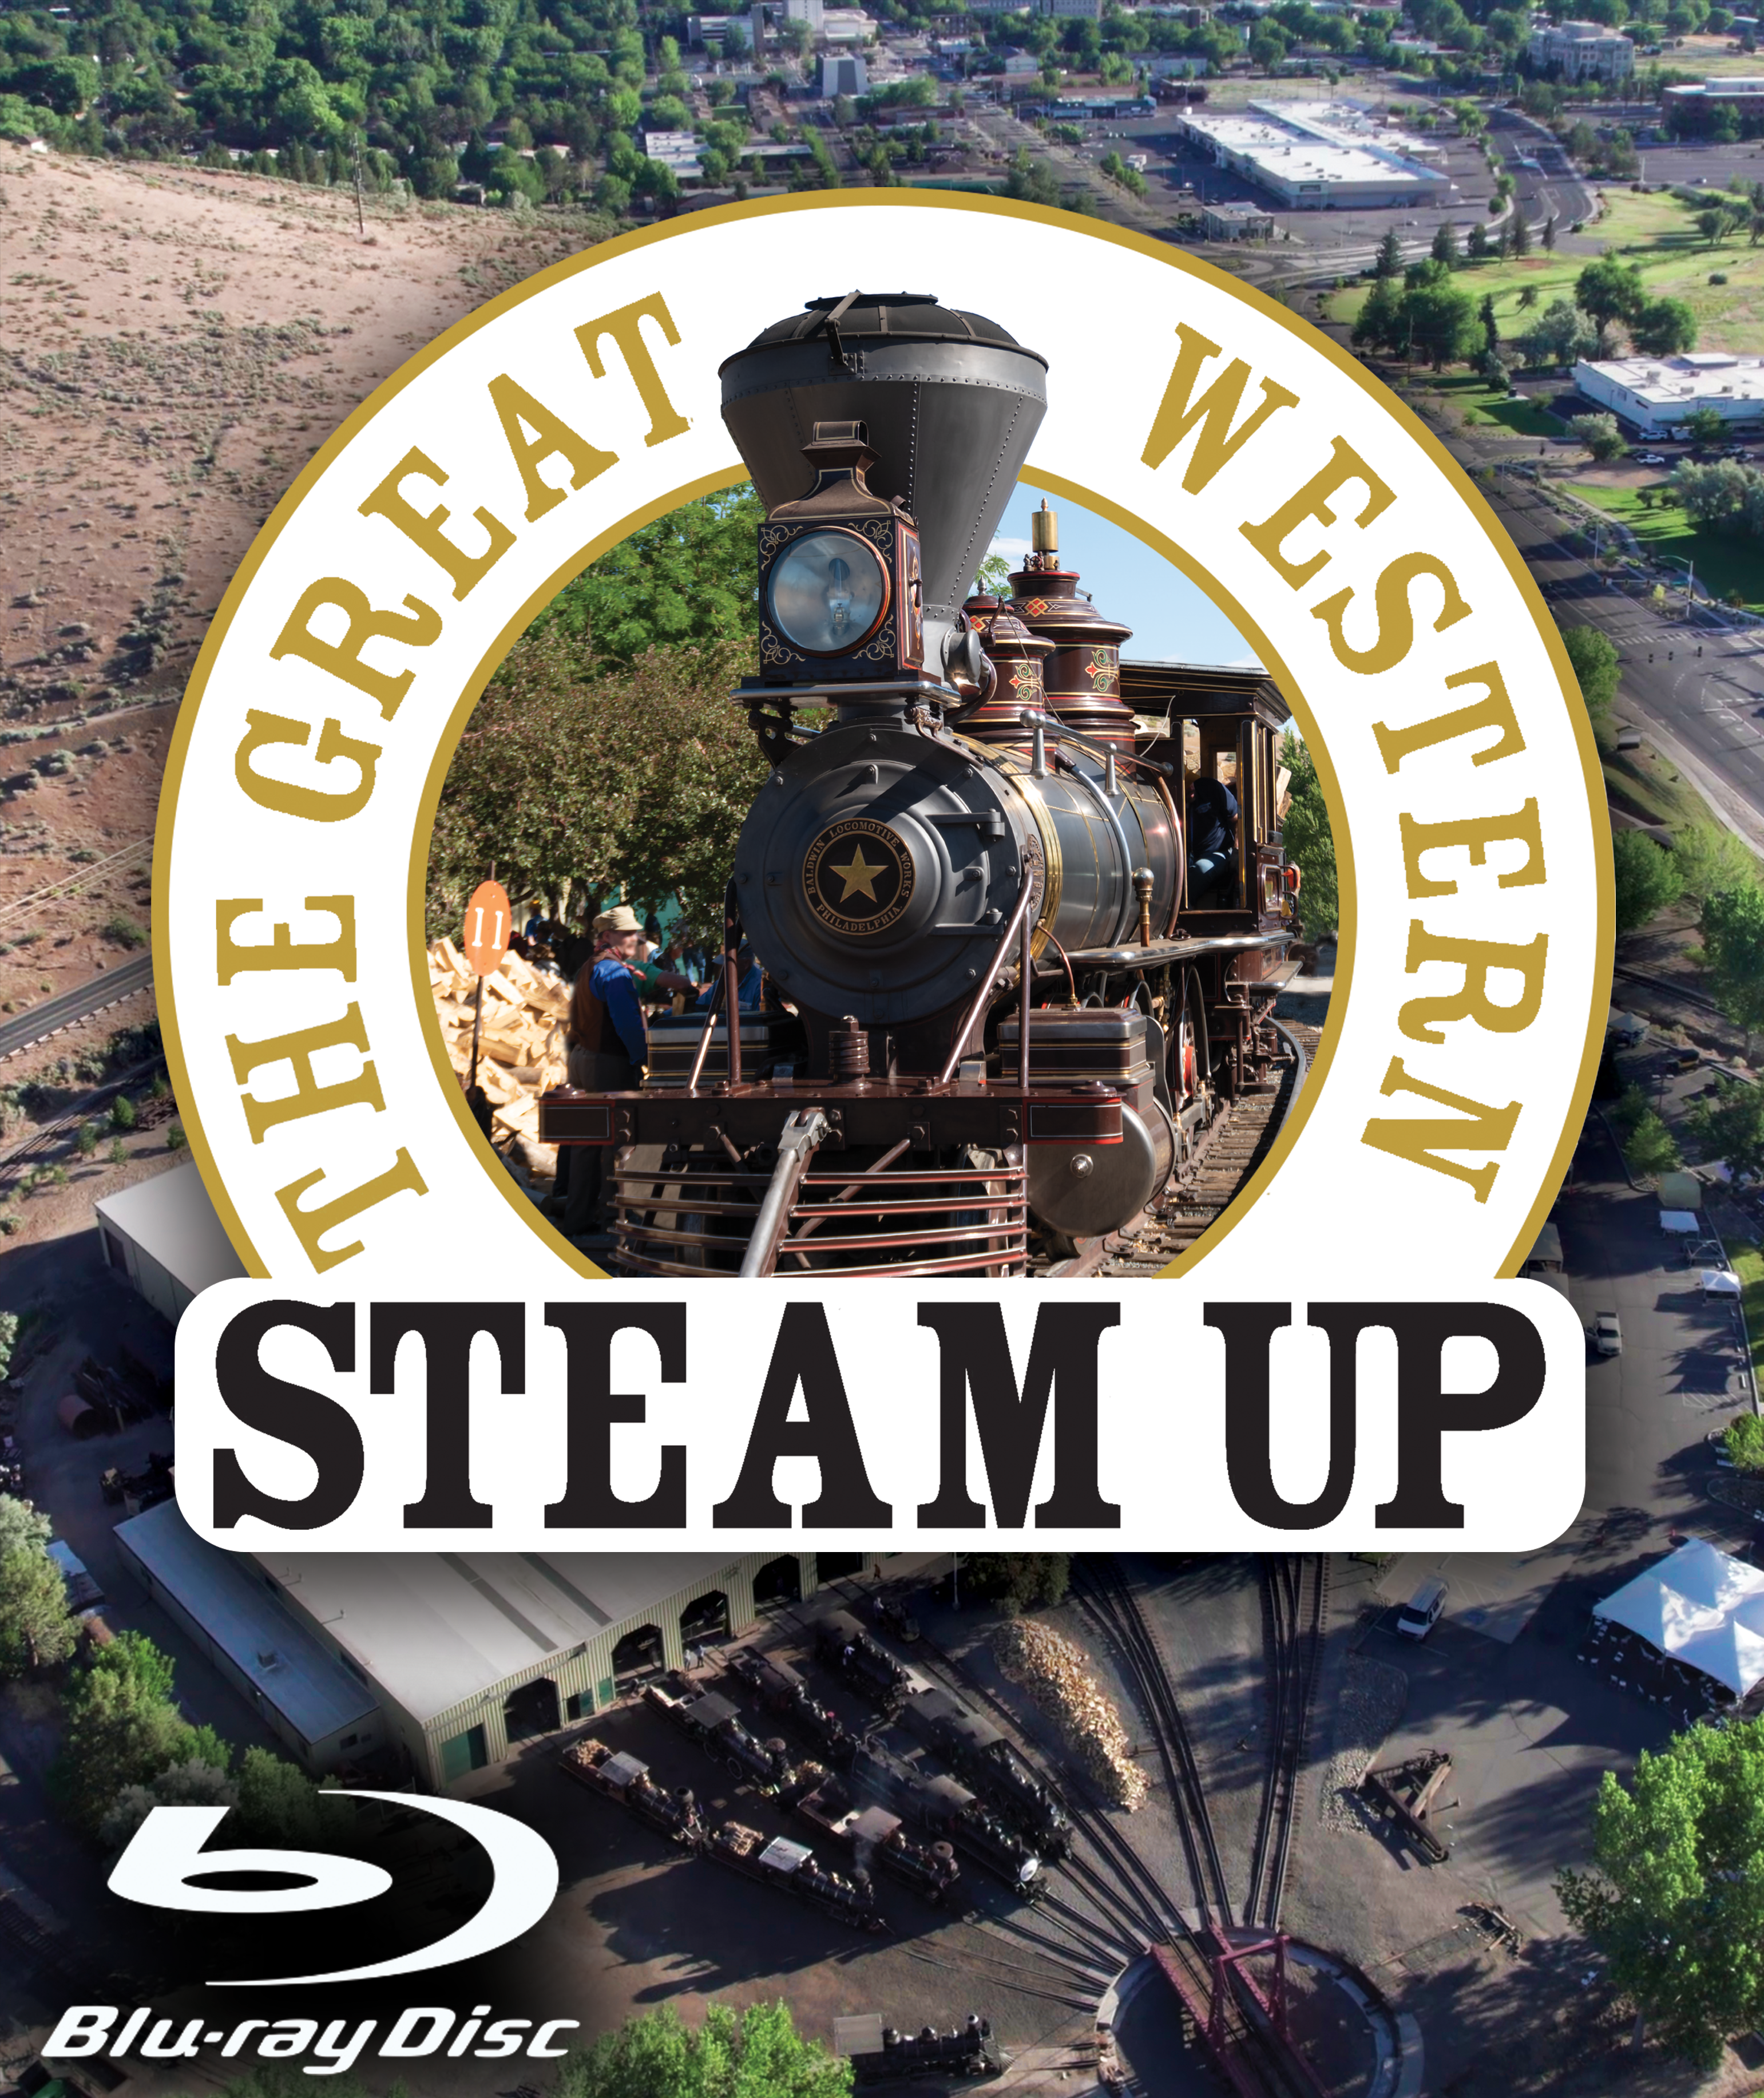 The Great Western Steam Up Disc Cover